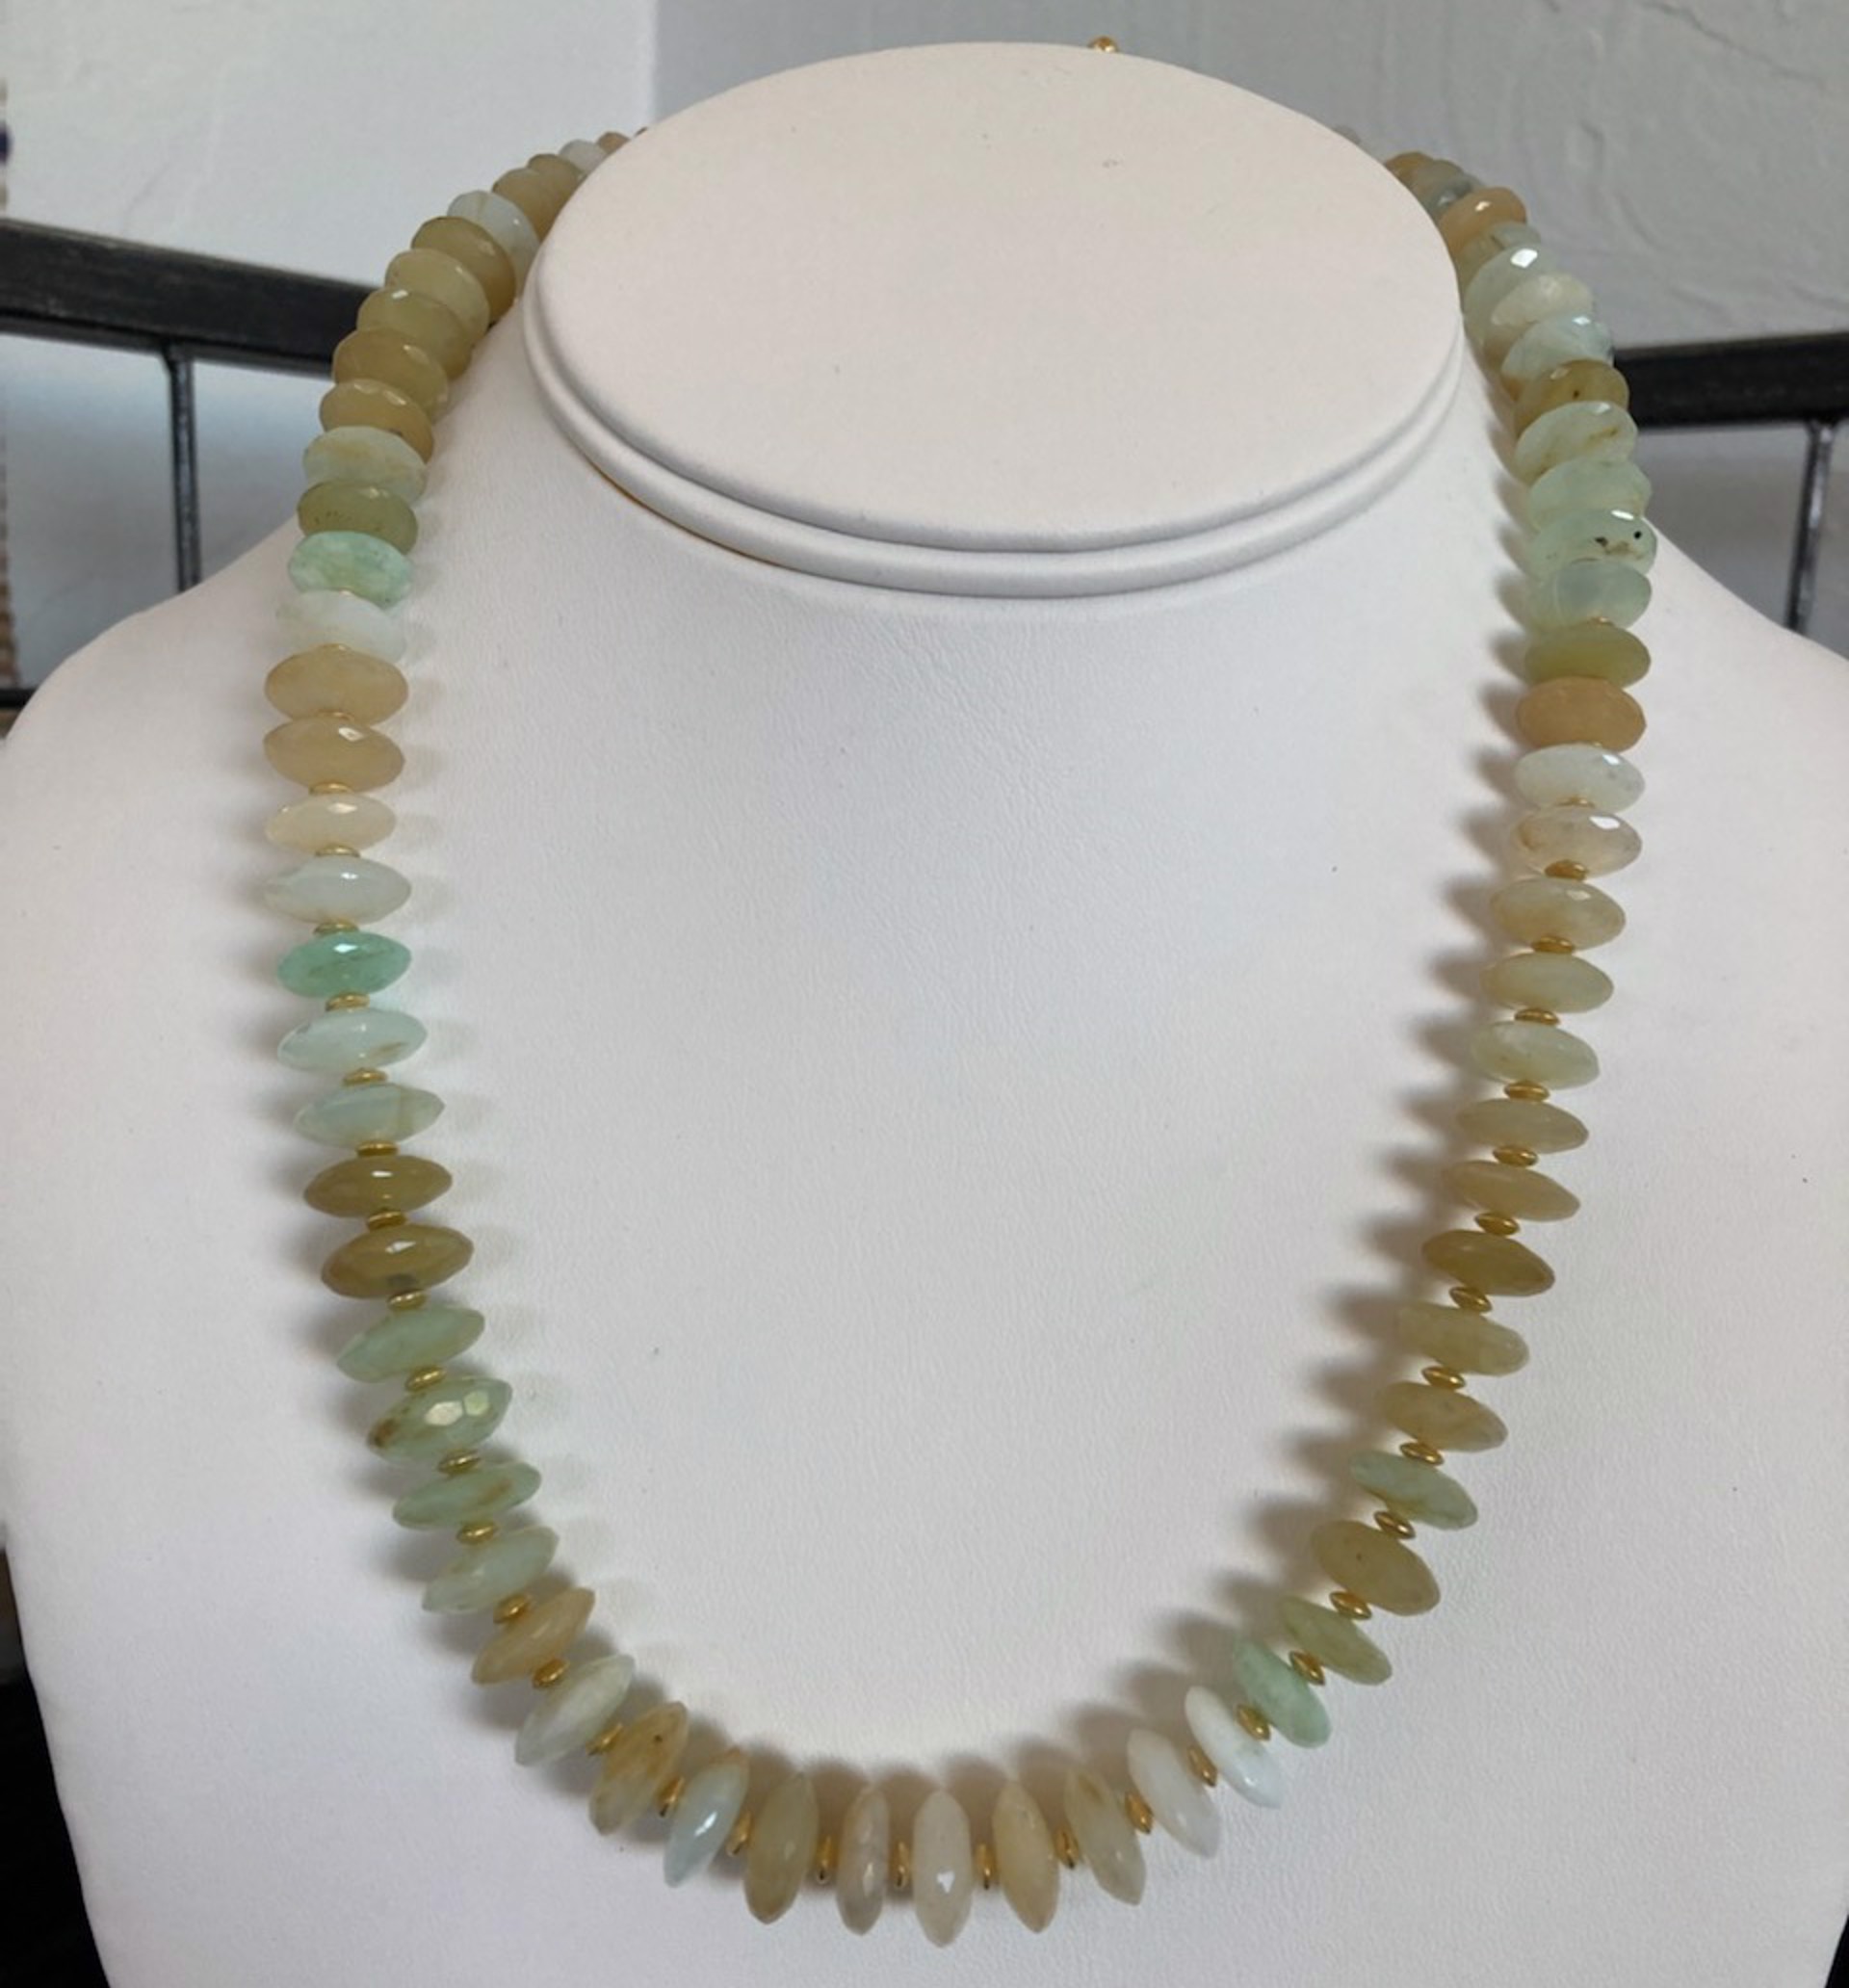 Necklace - Peruvian Opal and Gold Vermeil by Bonnie Jaus